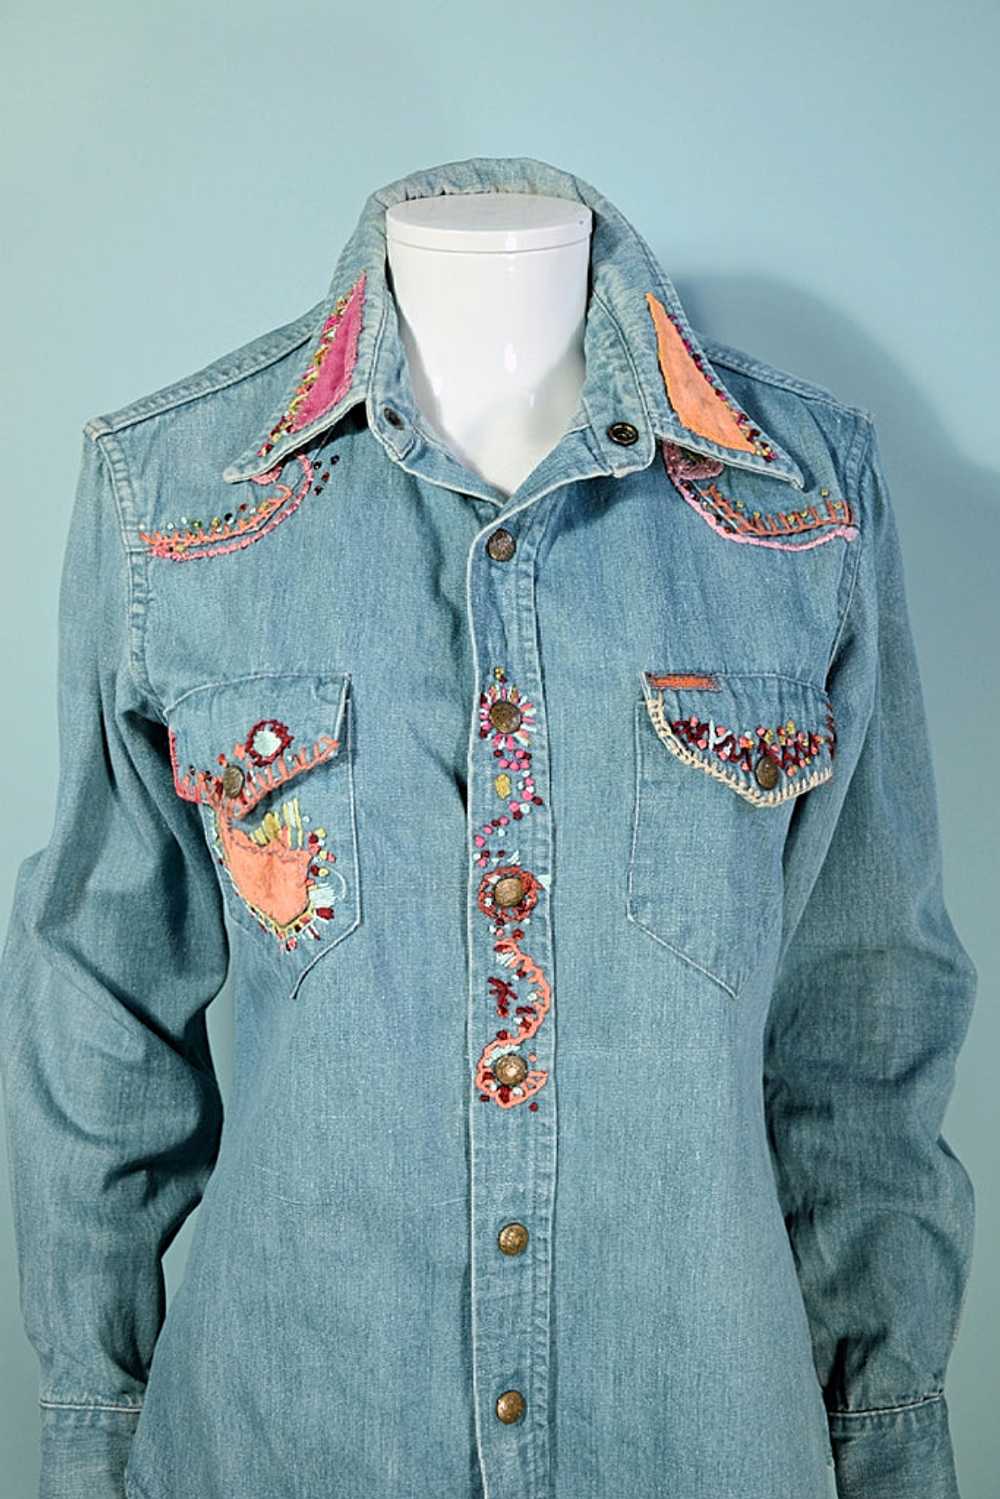 OOAK Vintage 60s70s Embroidered Patchwork Hippie … - image 9